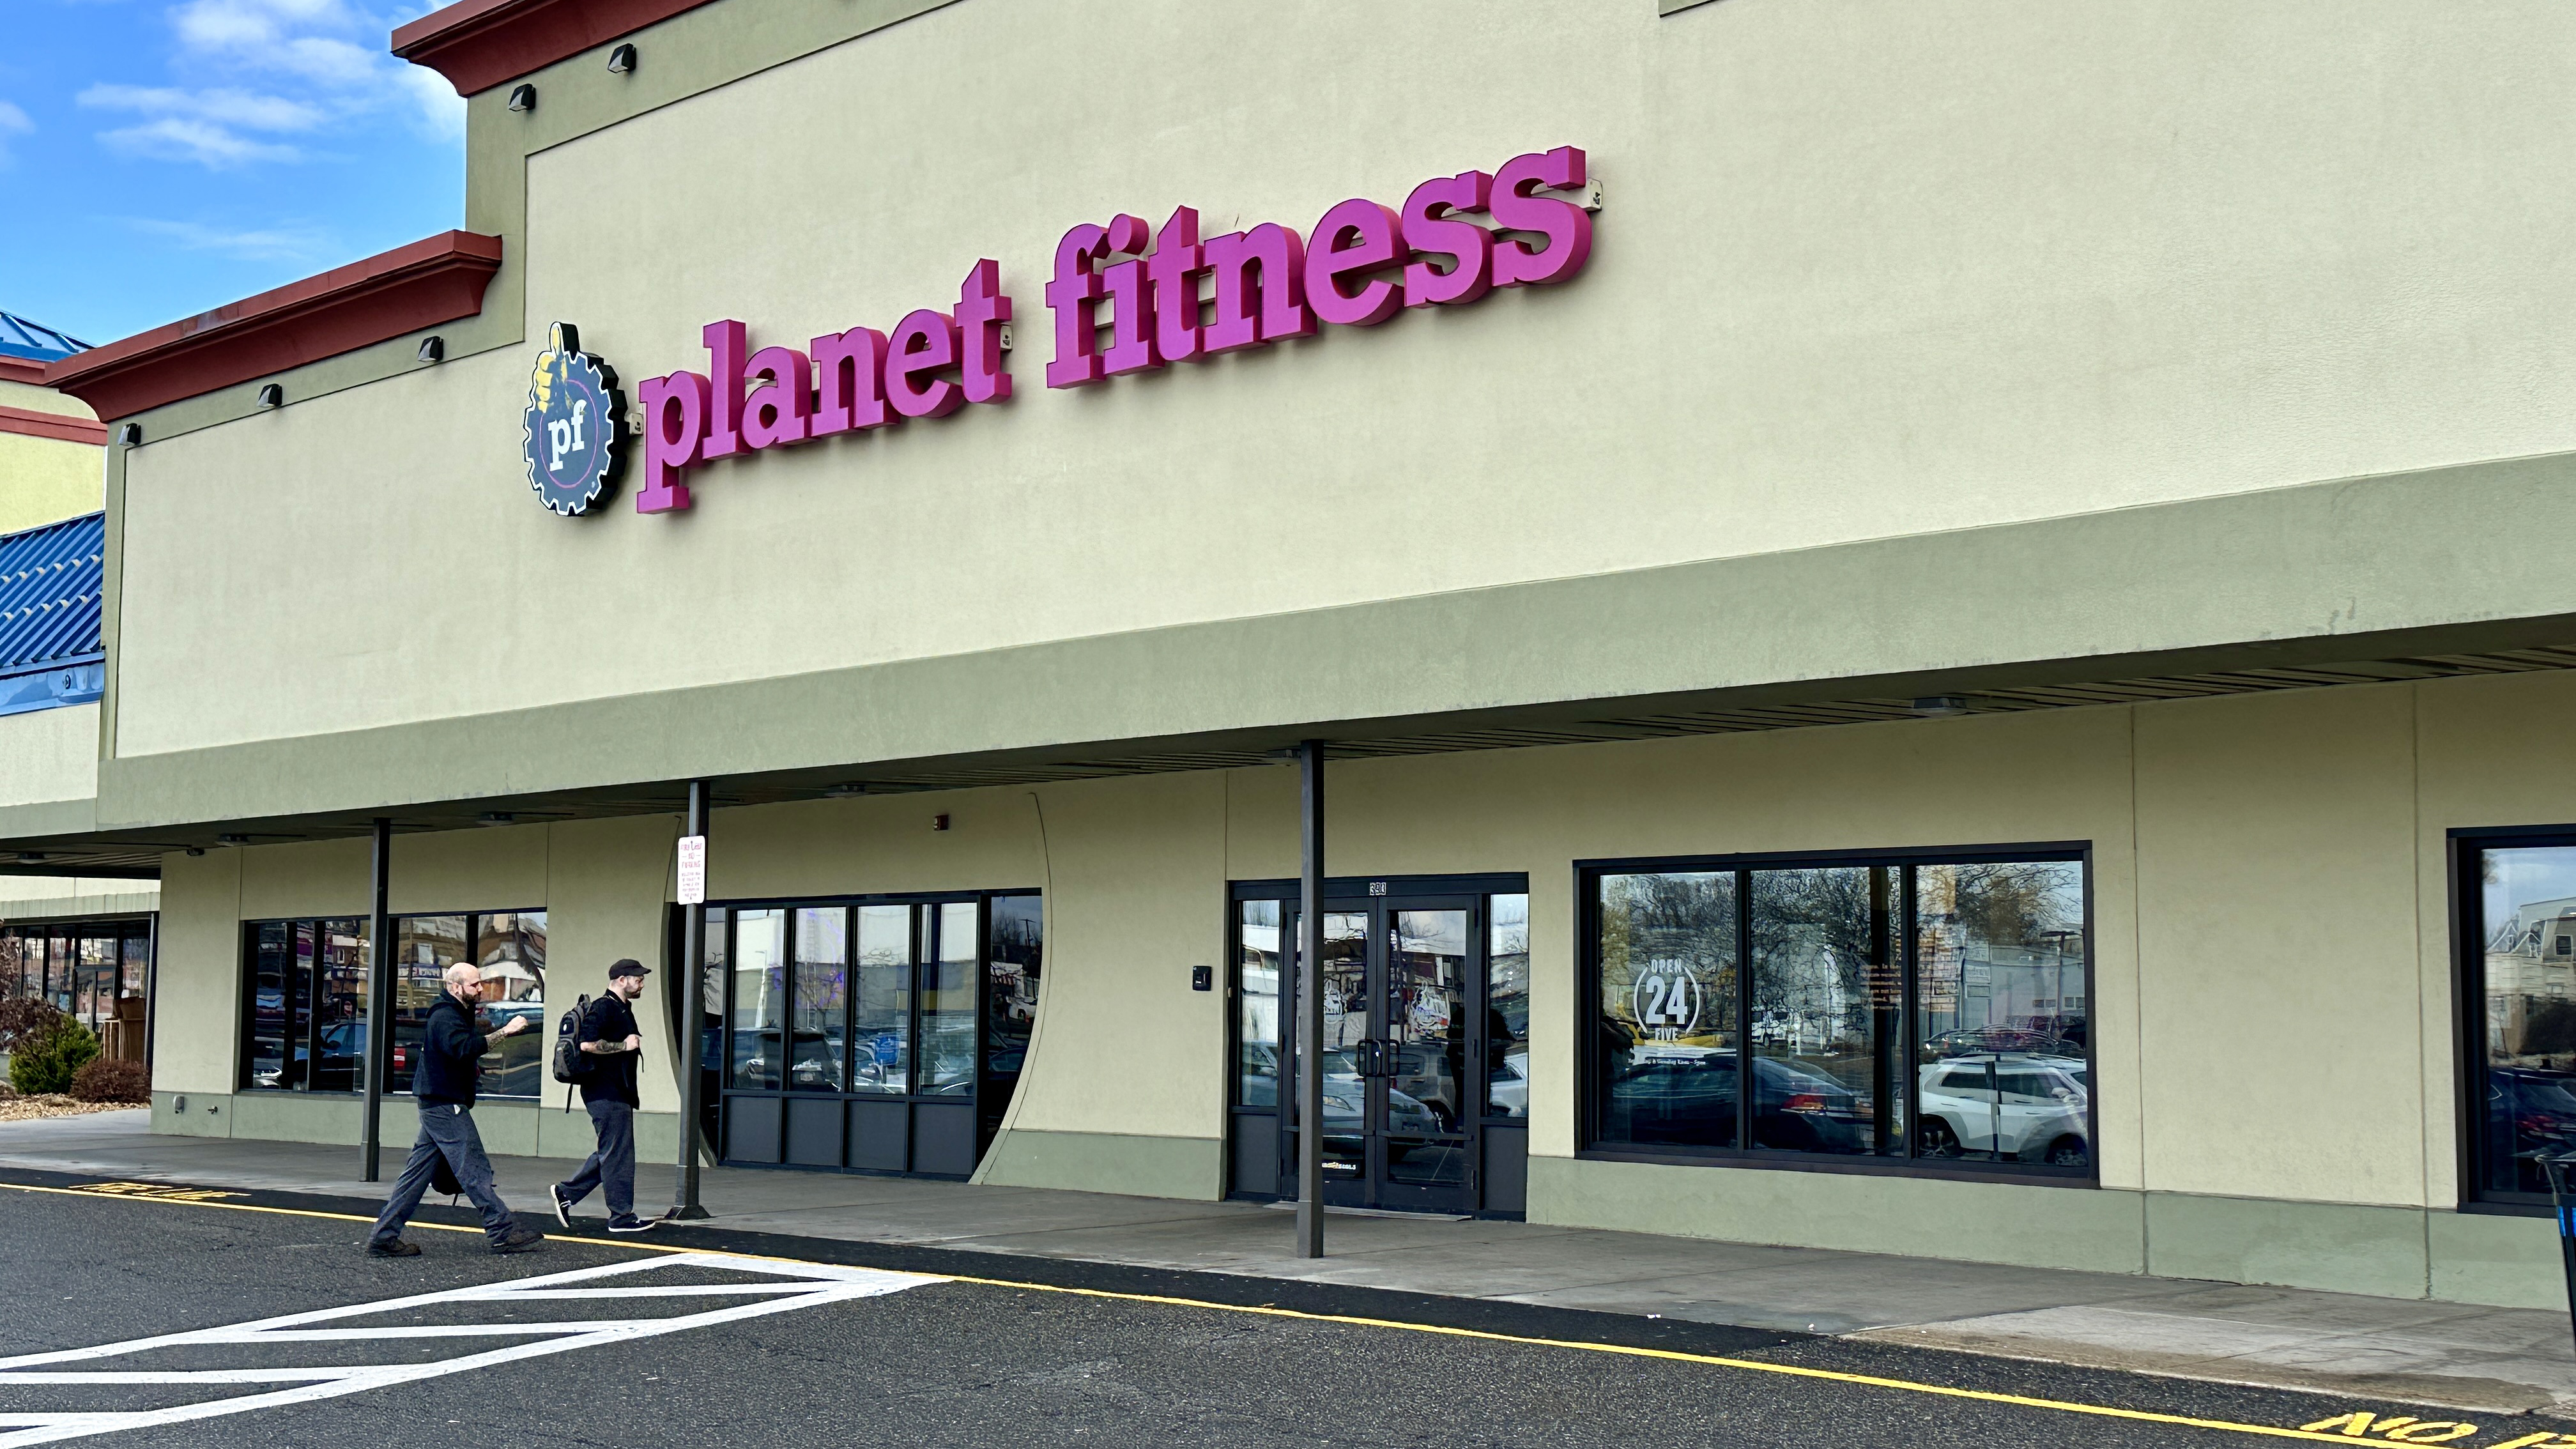 Planet Fitness officially Re-brands to Urth Fitness - Urth